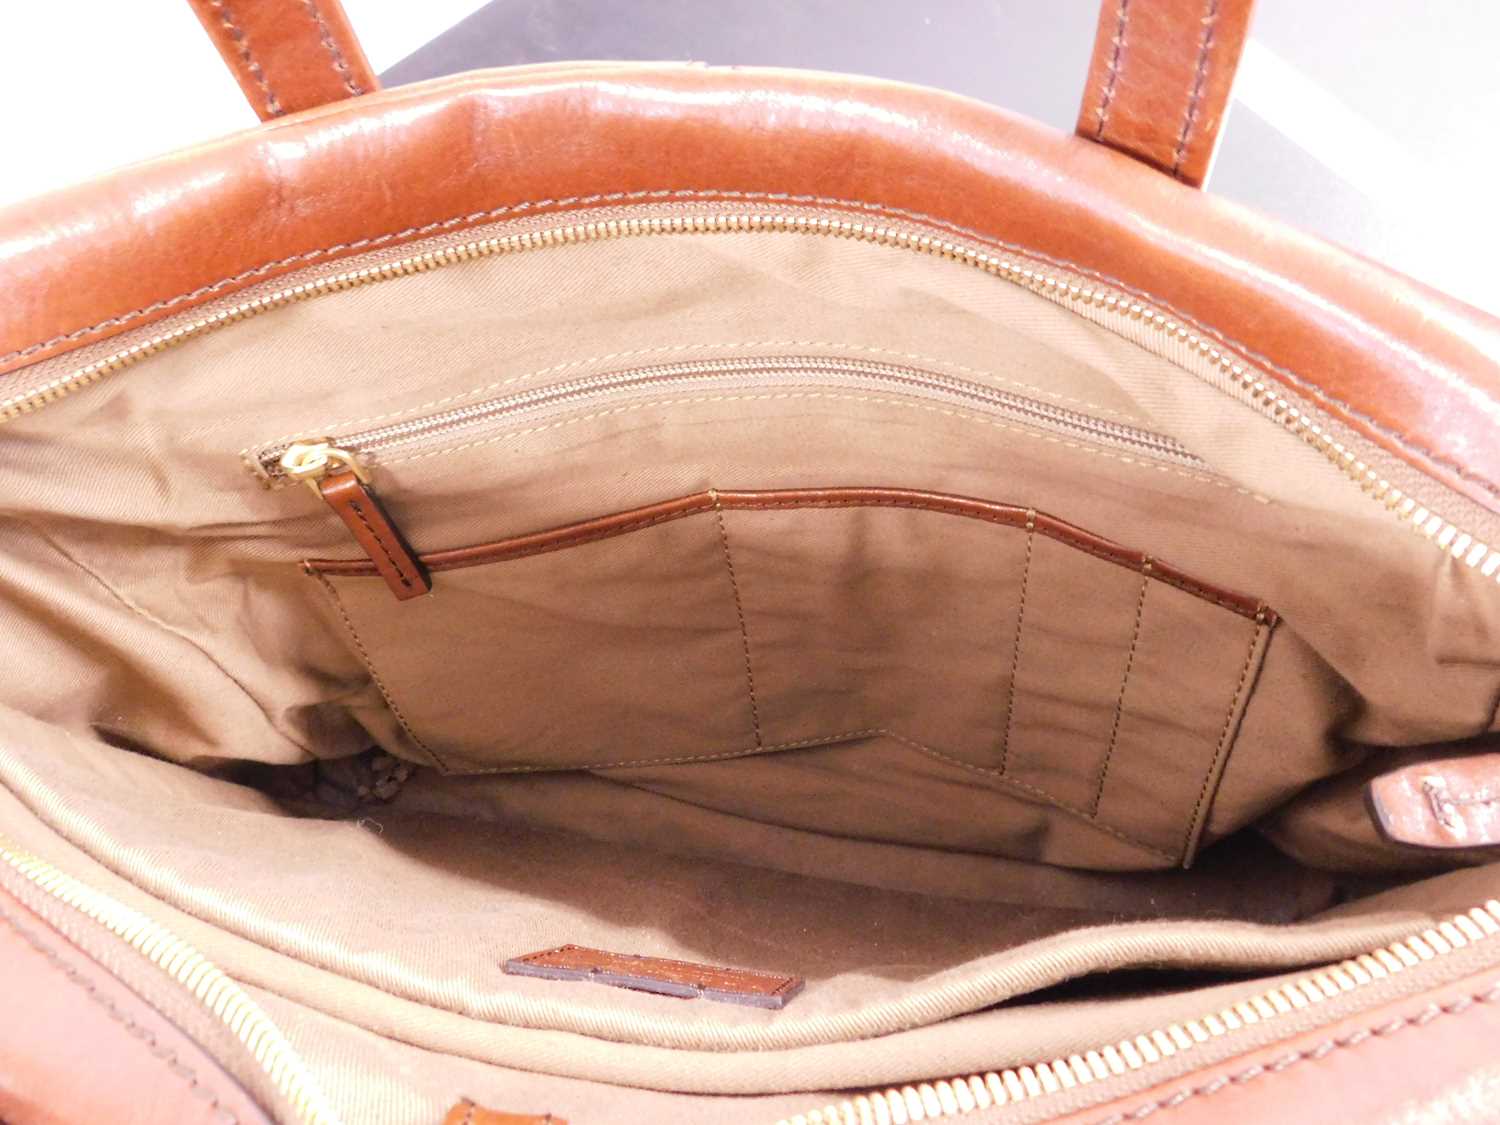 A tan leather tote bag by The Bridge, with top zip fastening with hand straps and detachable - Image 6 of 6